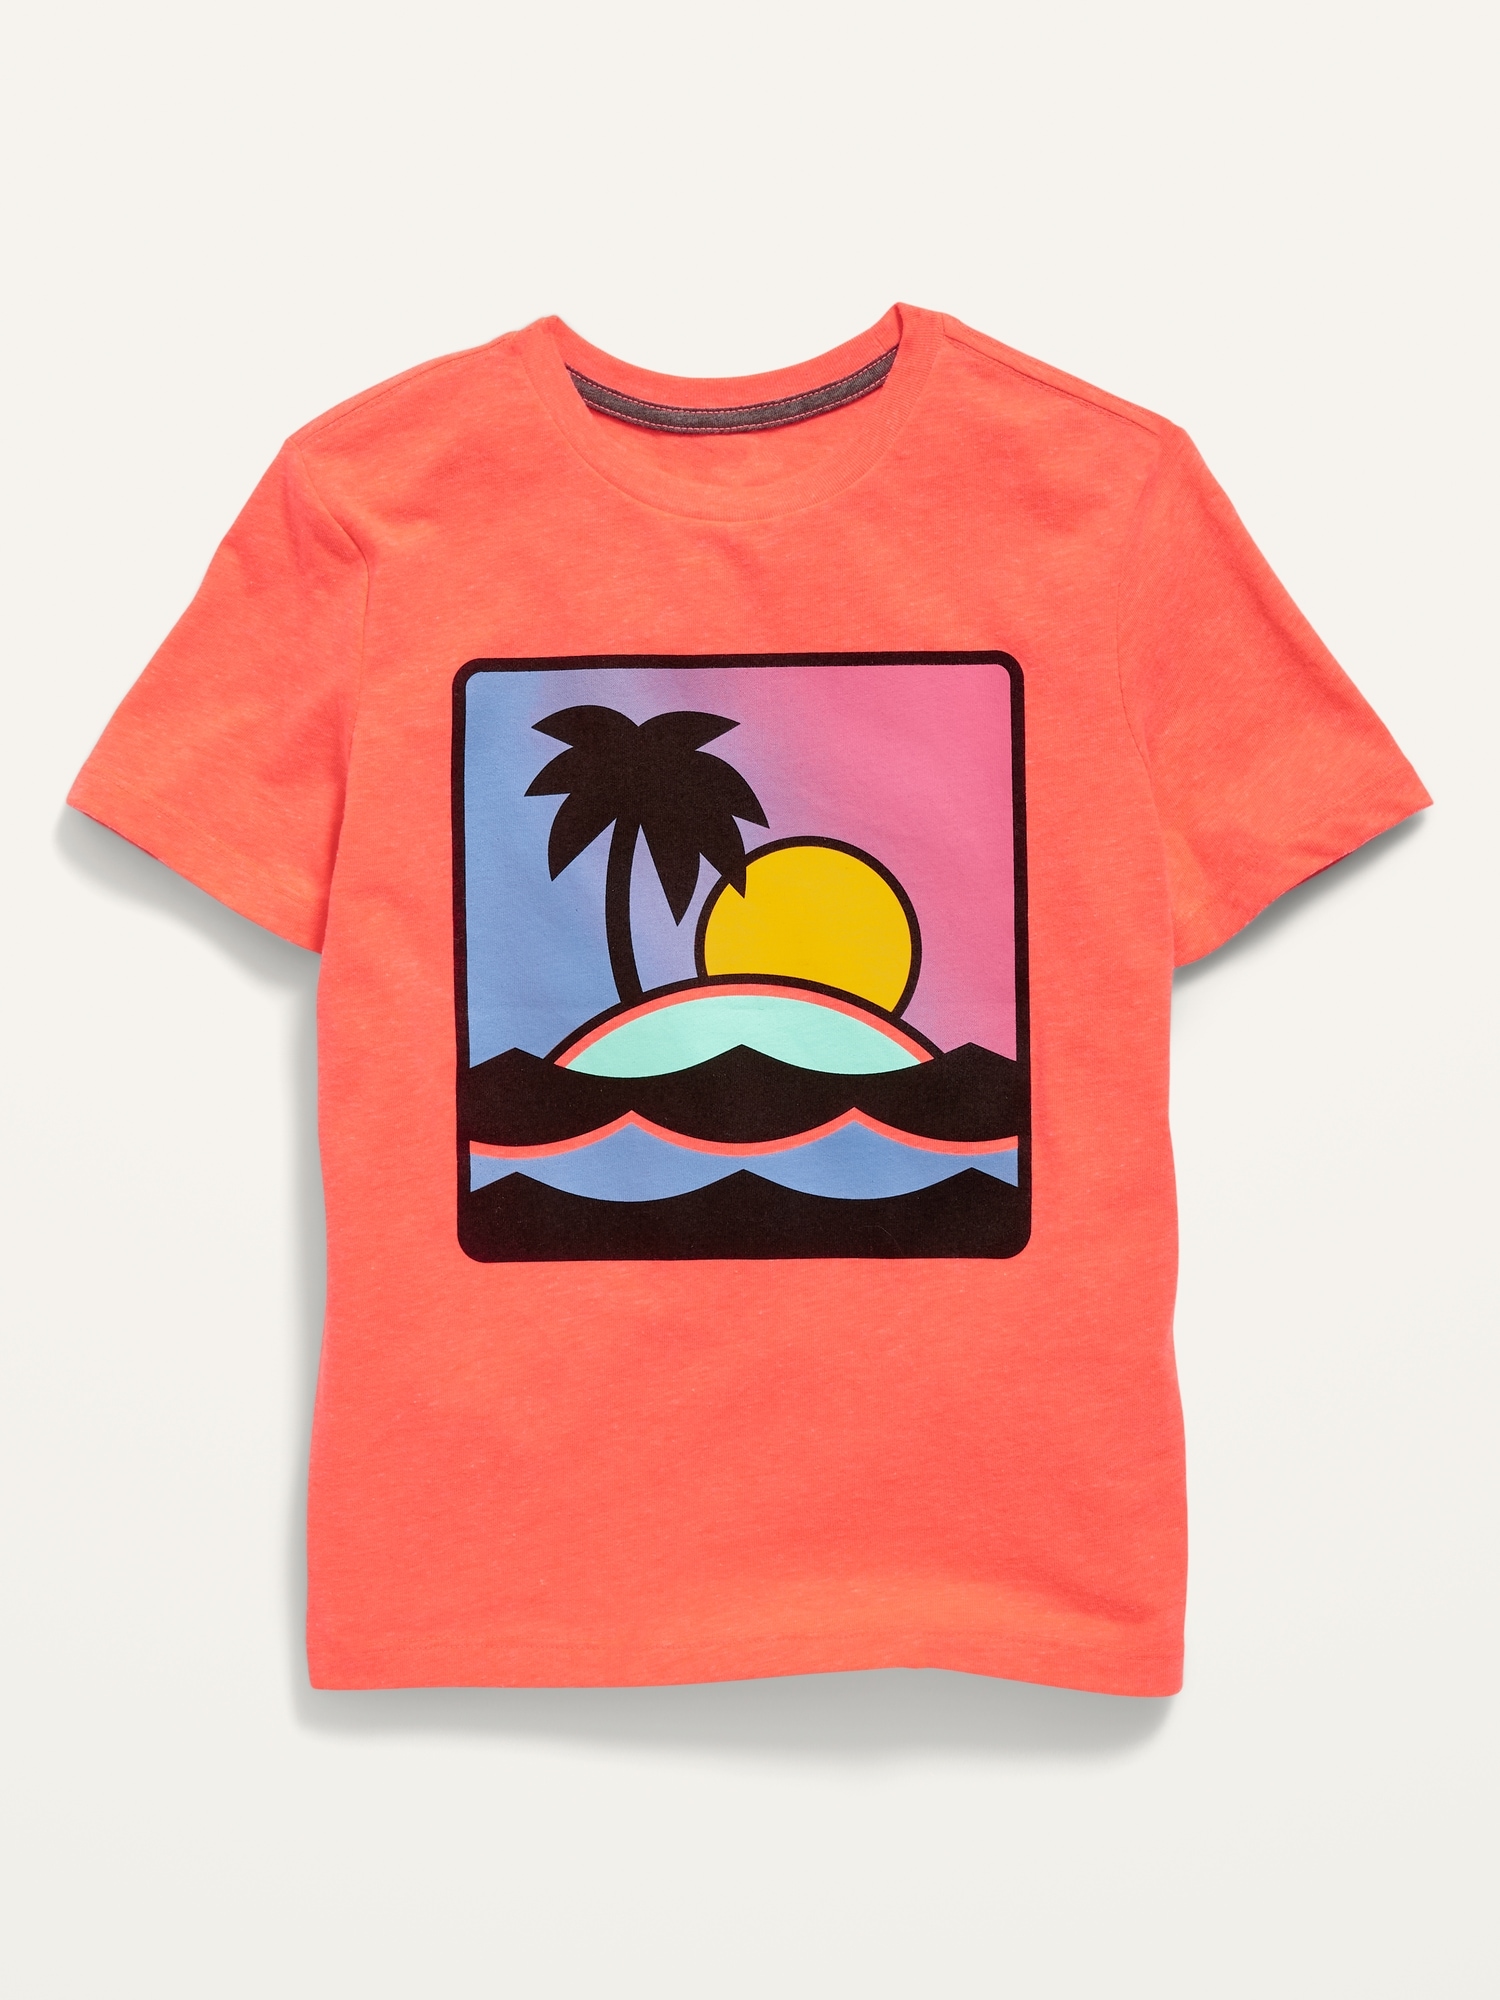 Gender-Neutral Graphic T-Shirt for Kids | Old Navy